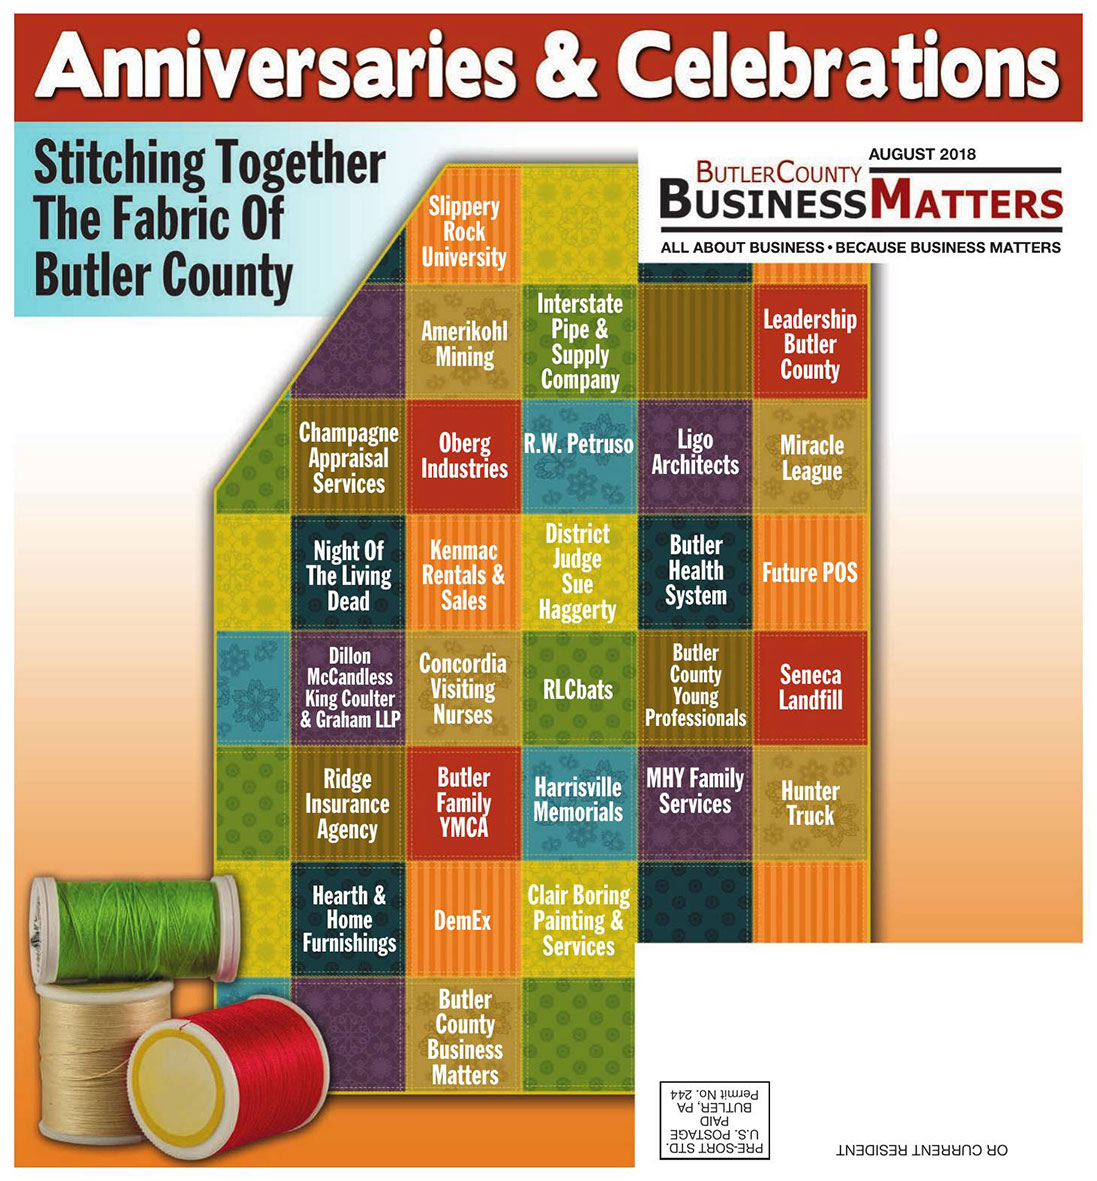 August 2018 - Anniversaries & Celebrations - Stitching Together the Fabric of Butler County